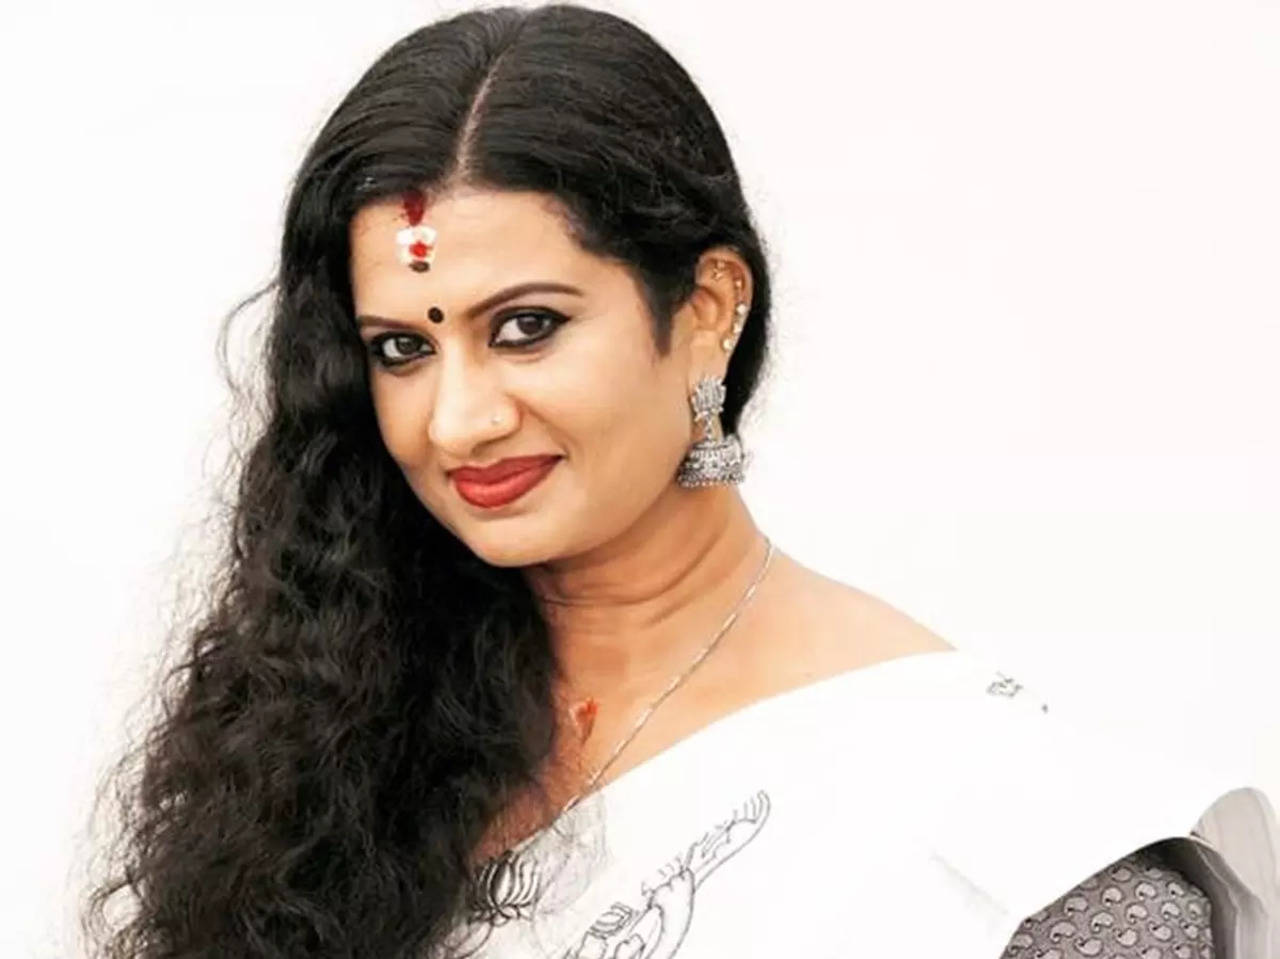 Actress Devi Chandana tests positive for COVID - Times of India